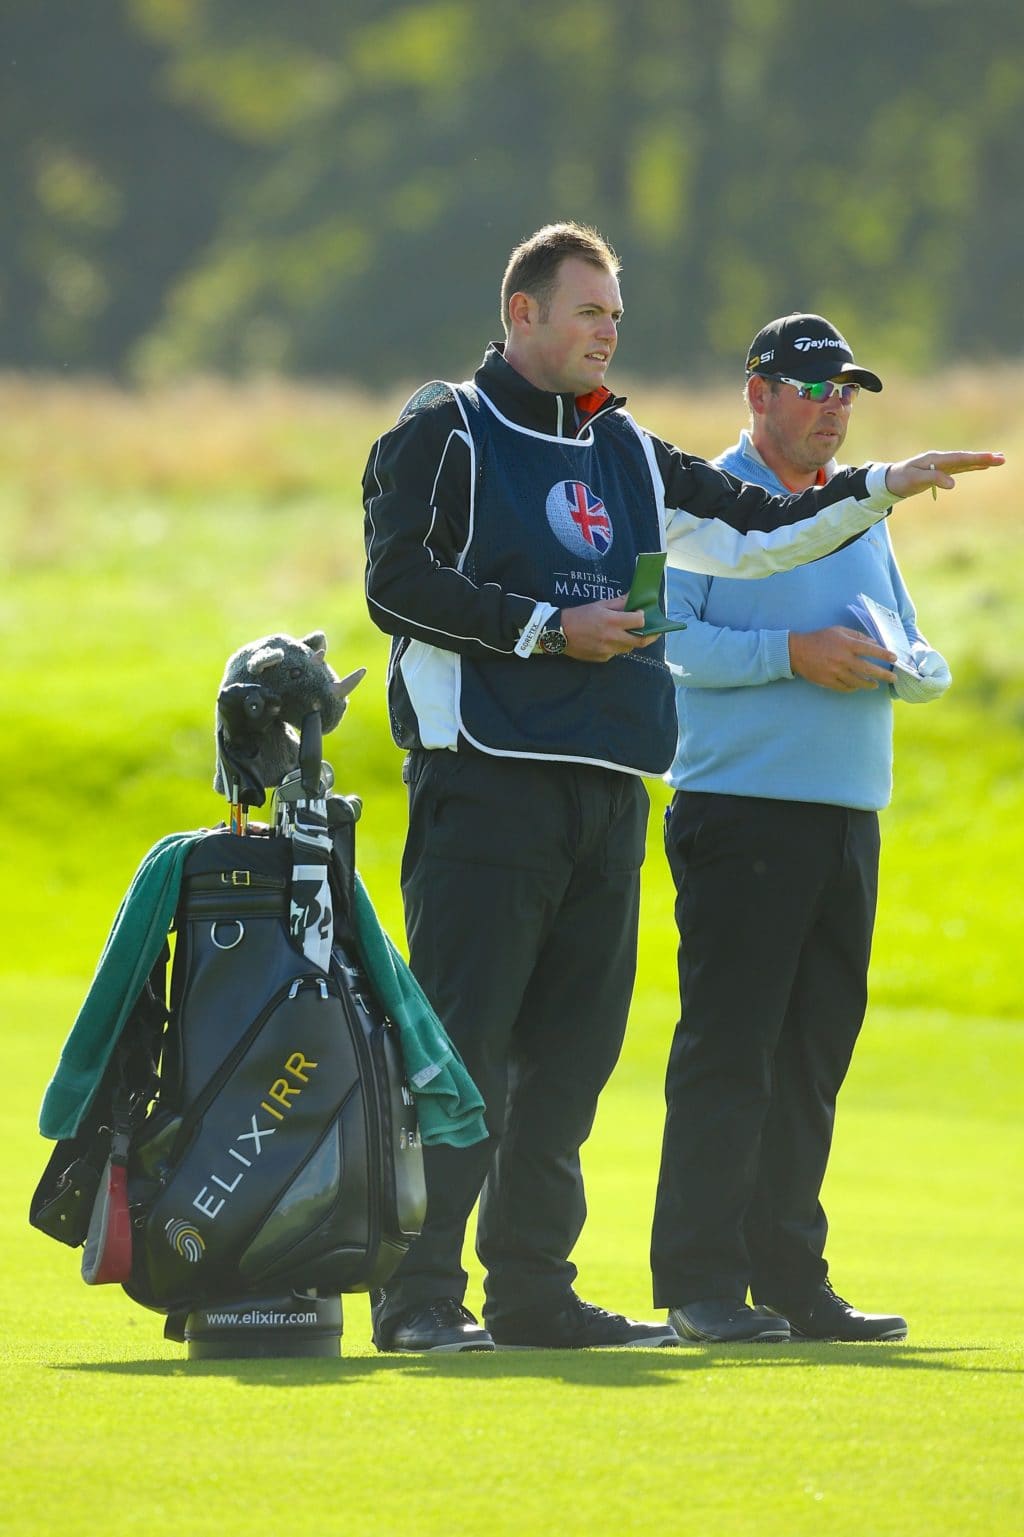 Justin Walter advising on Golf Course, British golf masters at The Grove UK country Golf resort